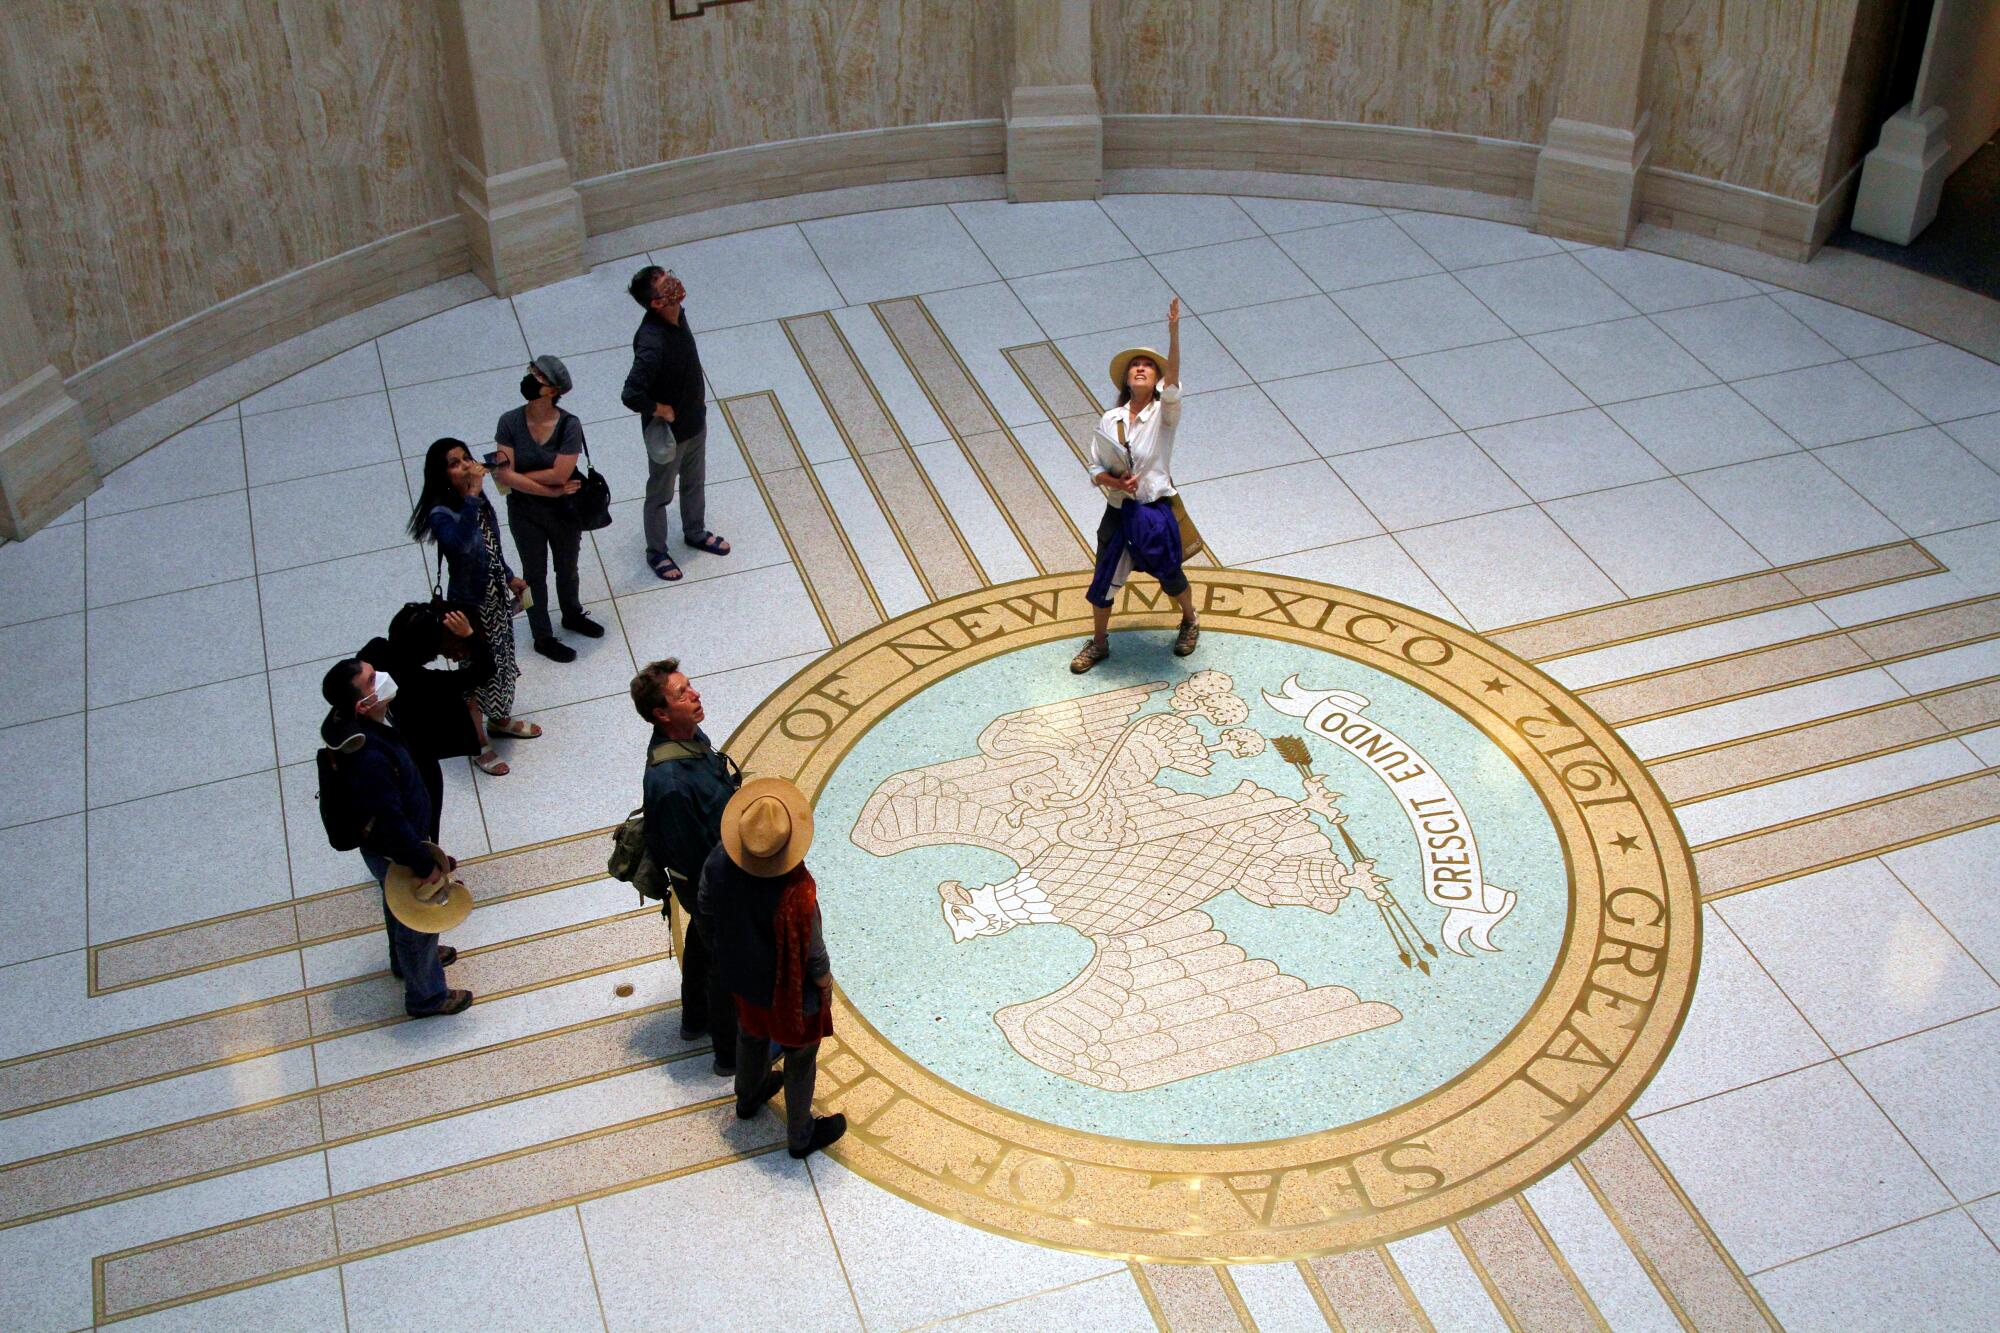 A bird's eye view of people looking up while standing in a round room, with a seal of New Mexico on the floor